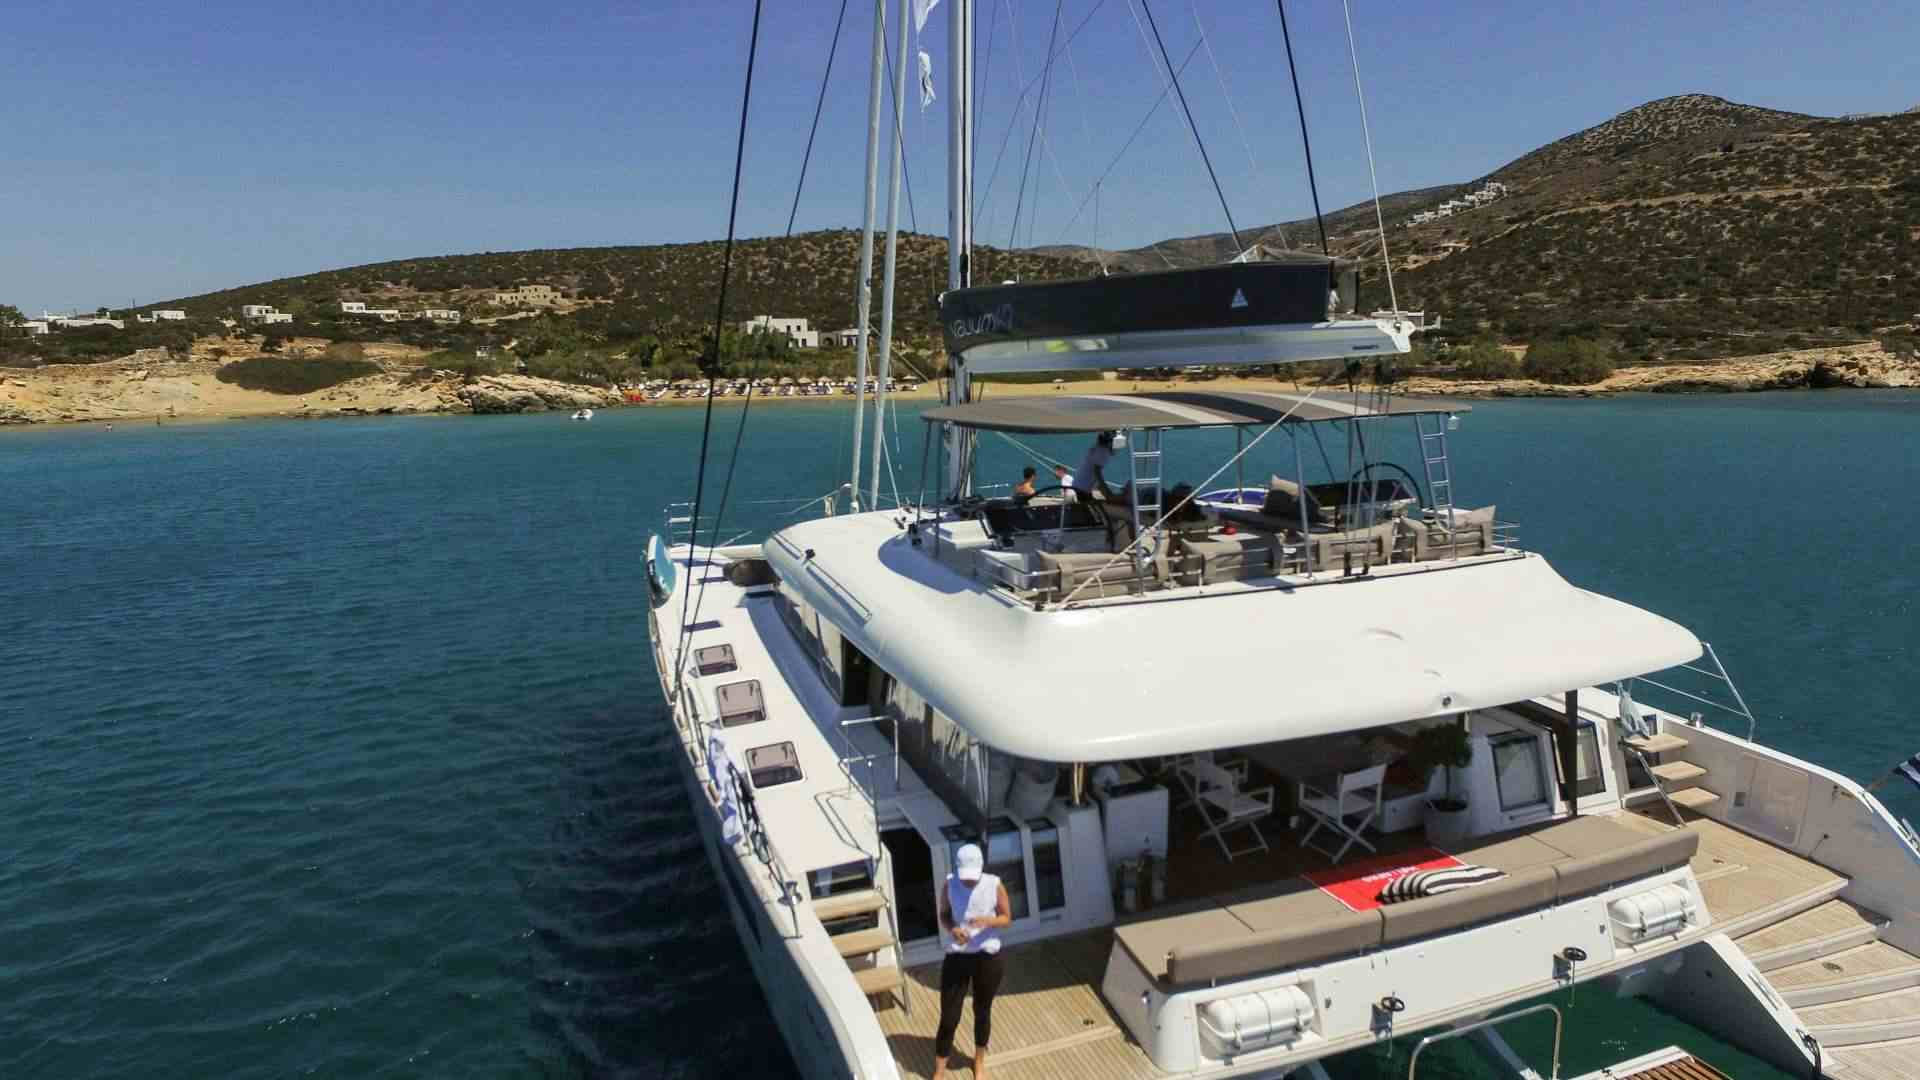 valium62 - Yacht Charter Athens & Boat hire in Greece 1